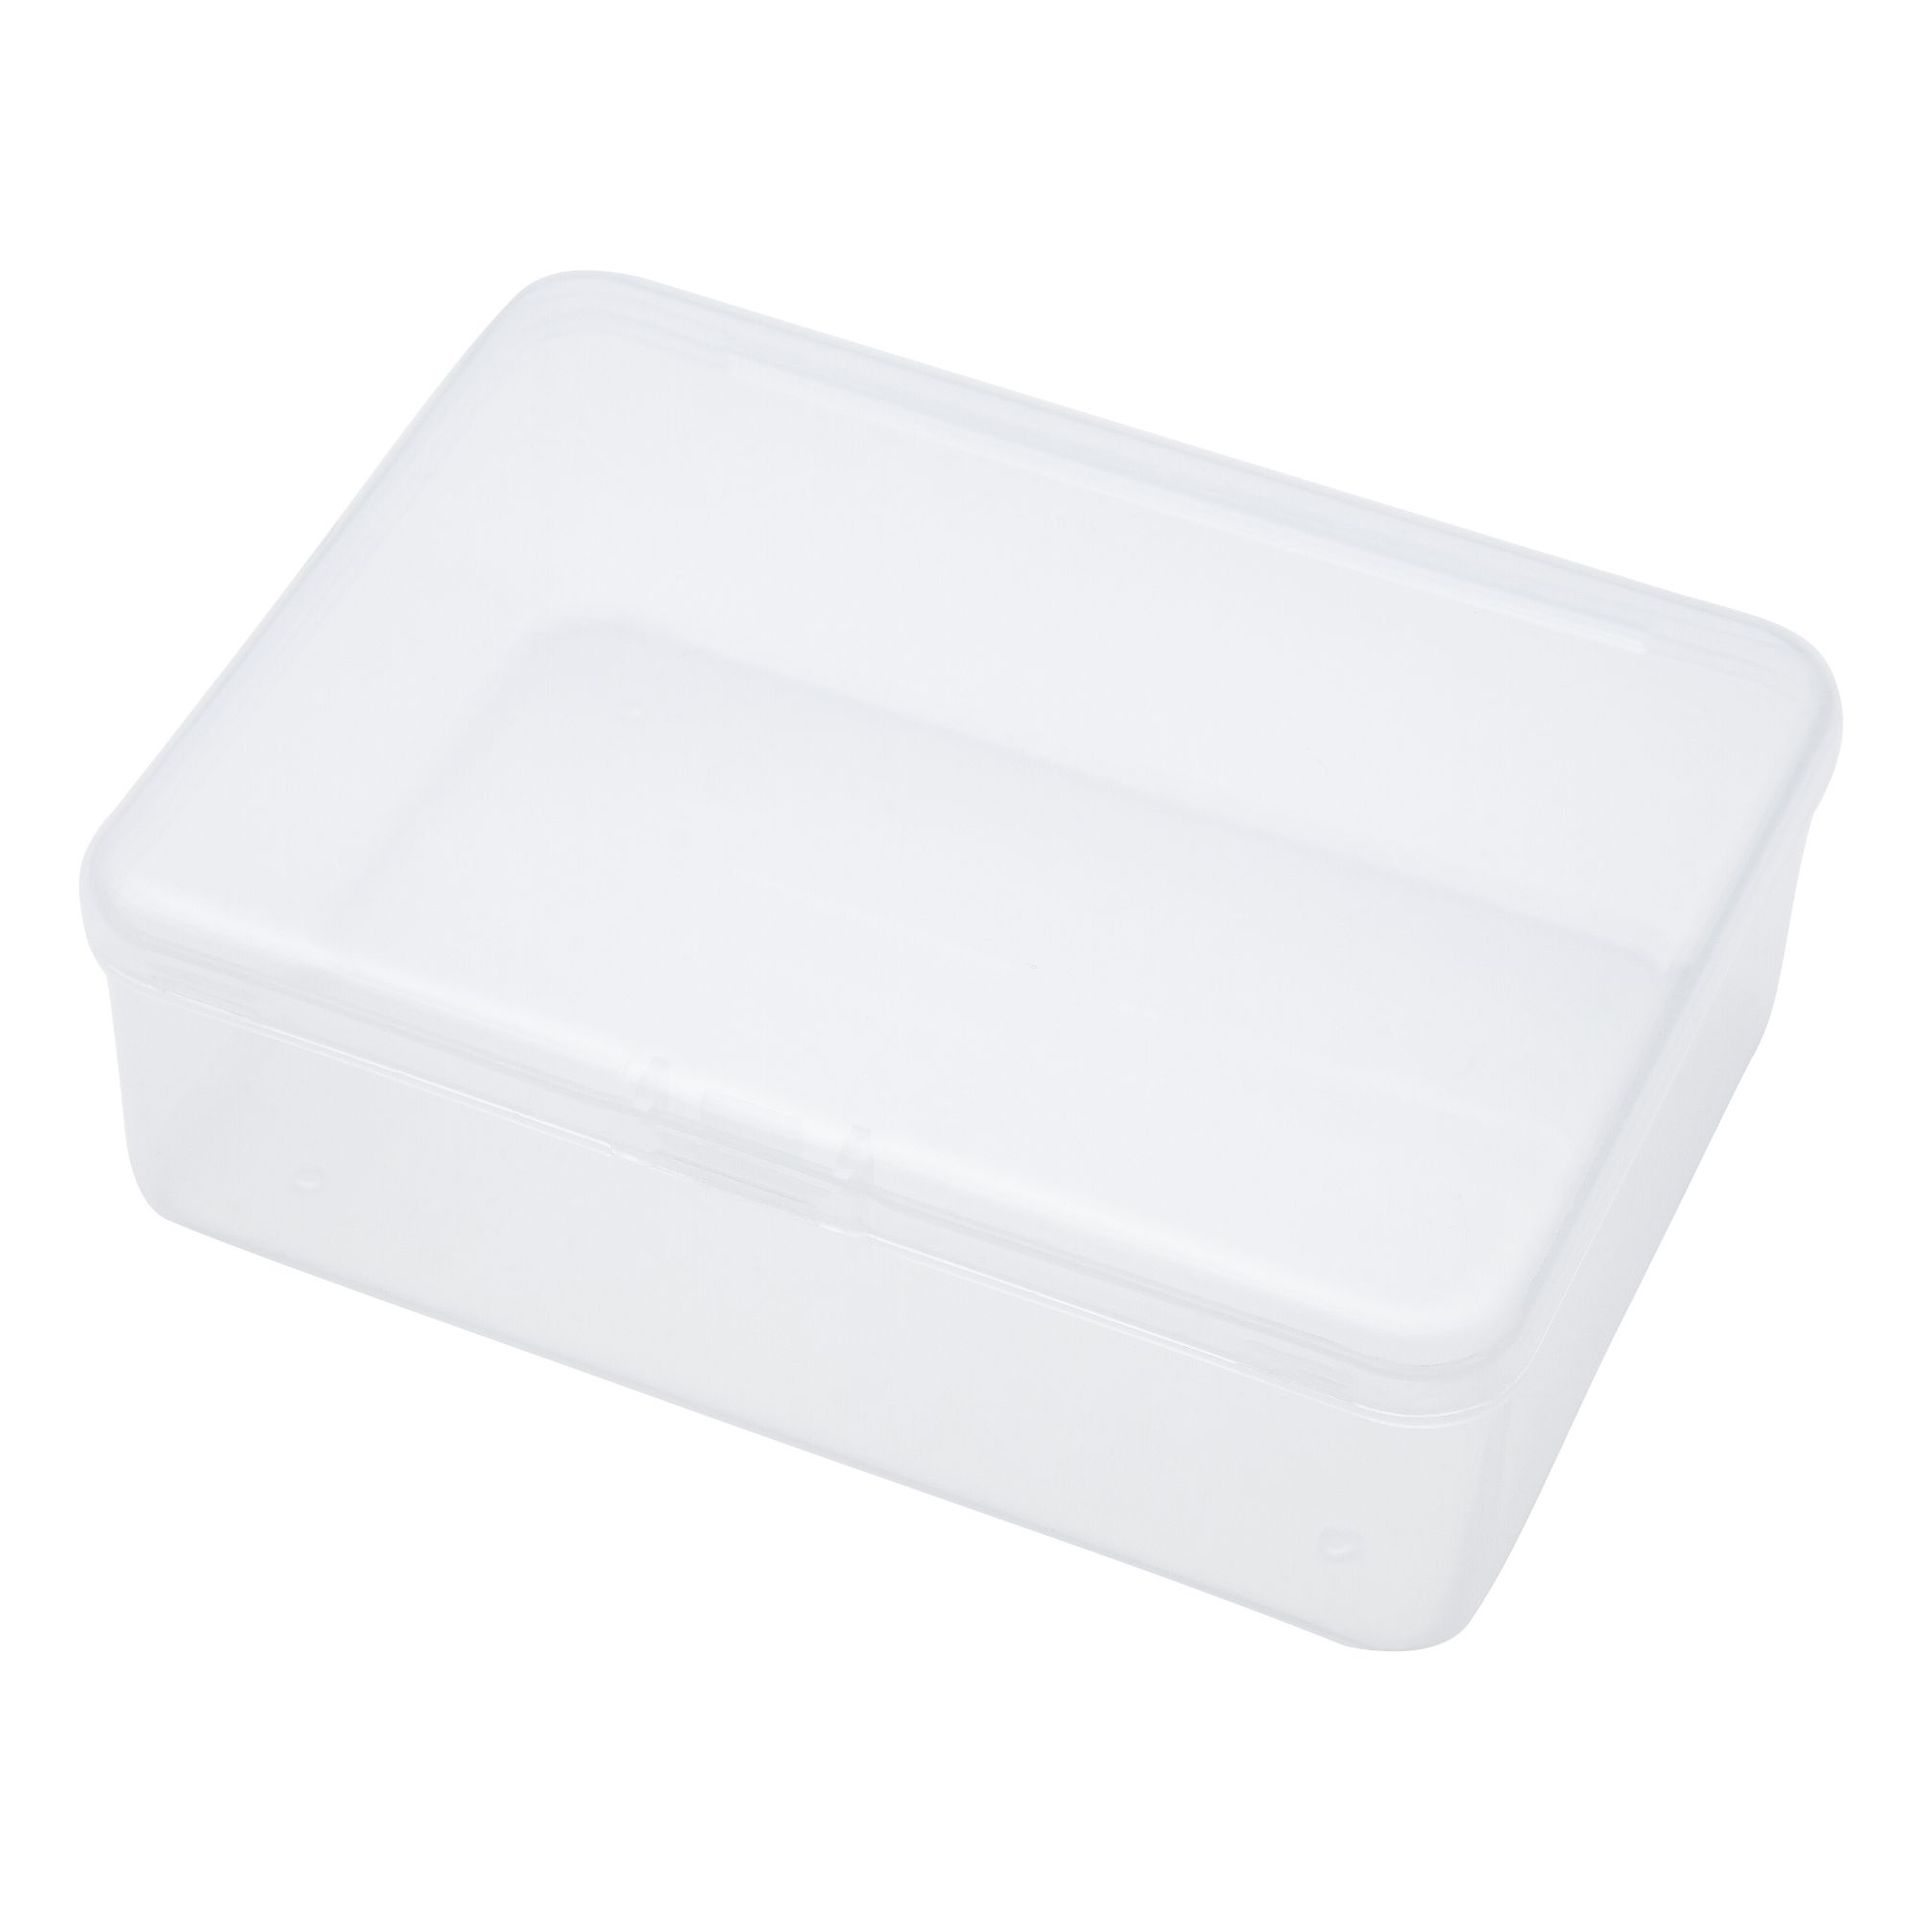 4 Transparent Pp Box Covered Ornament Parts Finishing Storage Box Student Stationery Plastic Box Bags